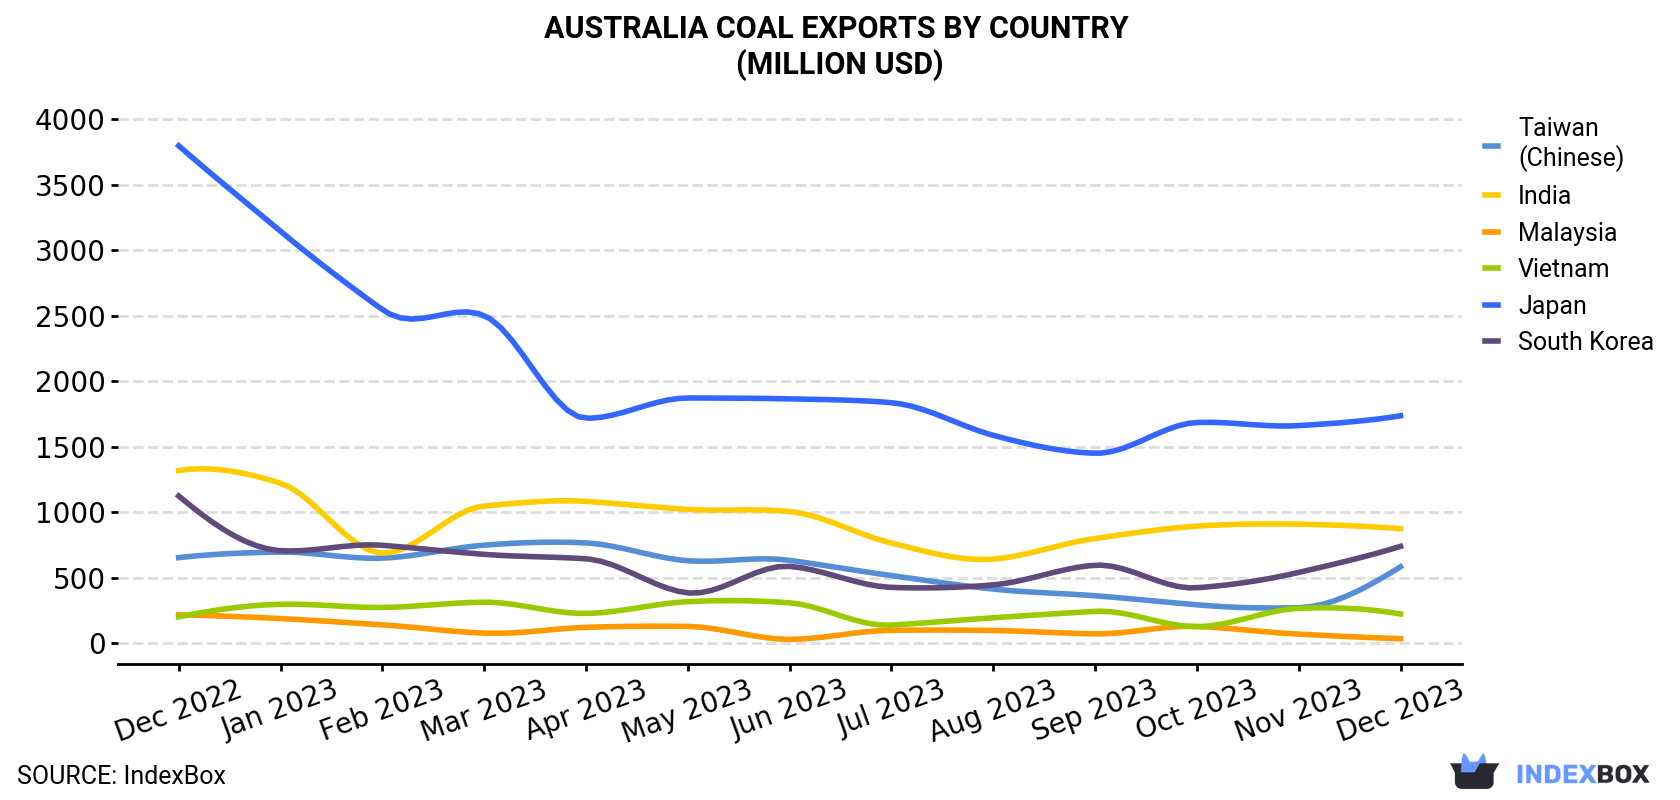 Australia Coal Exports By Country (Million USD)